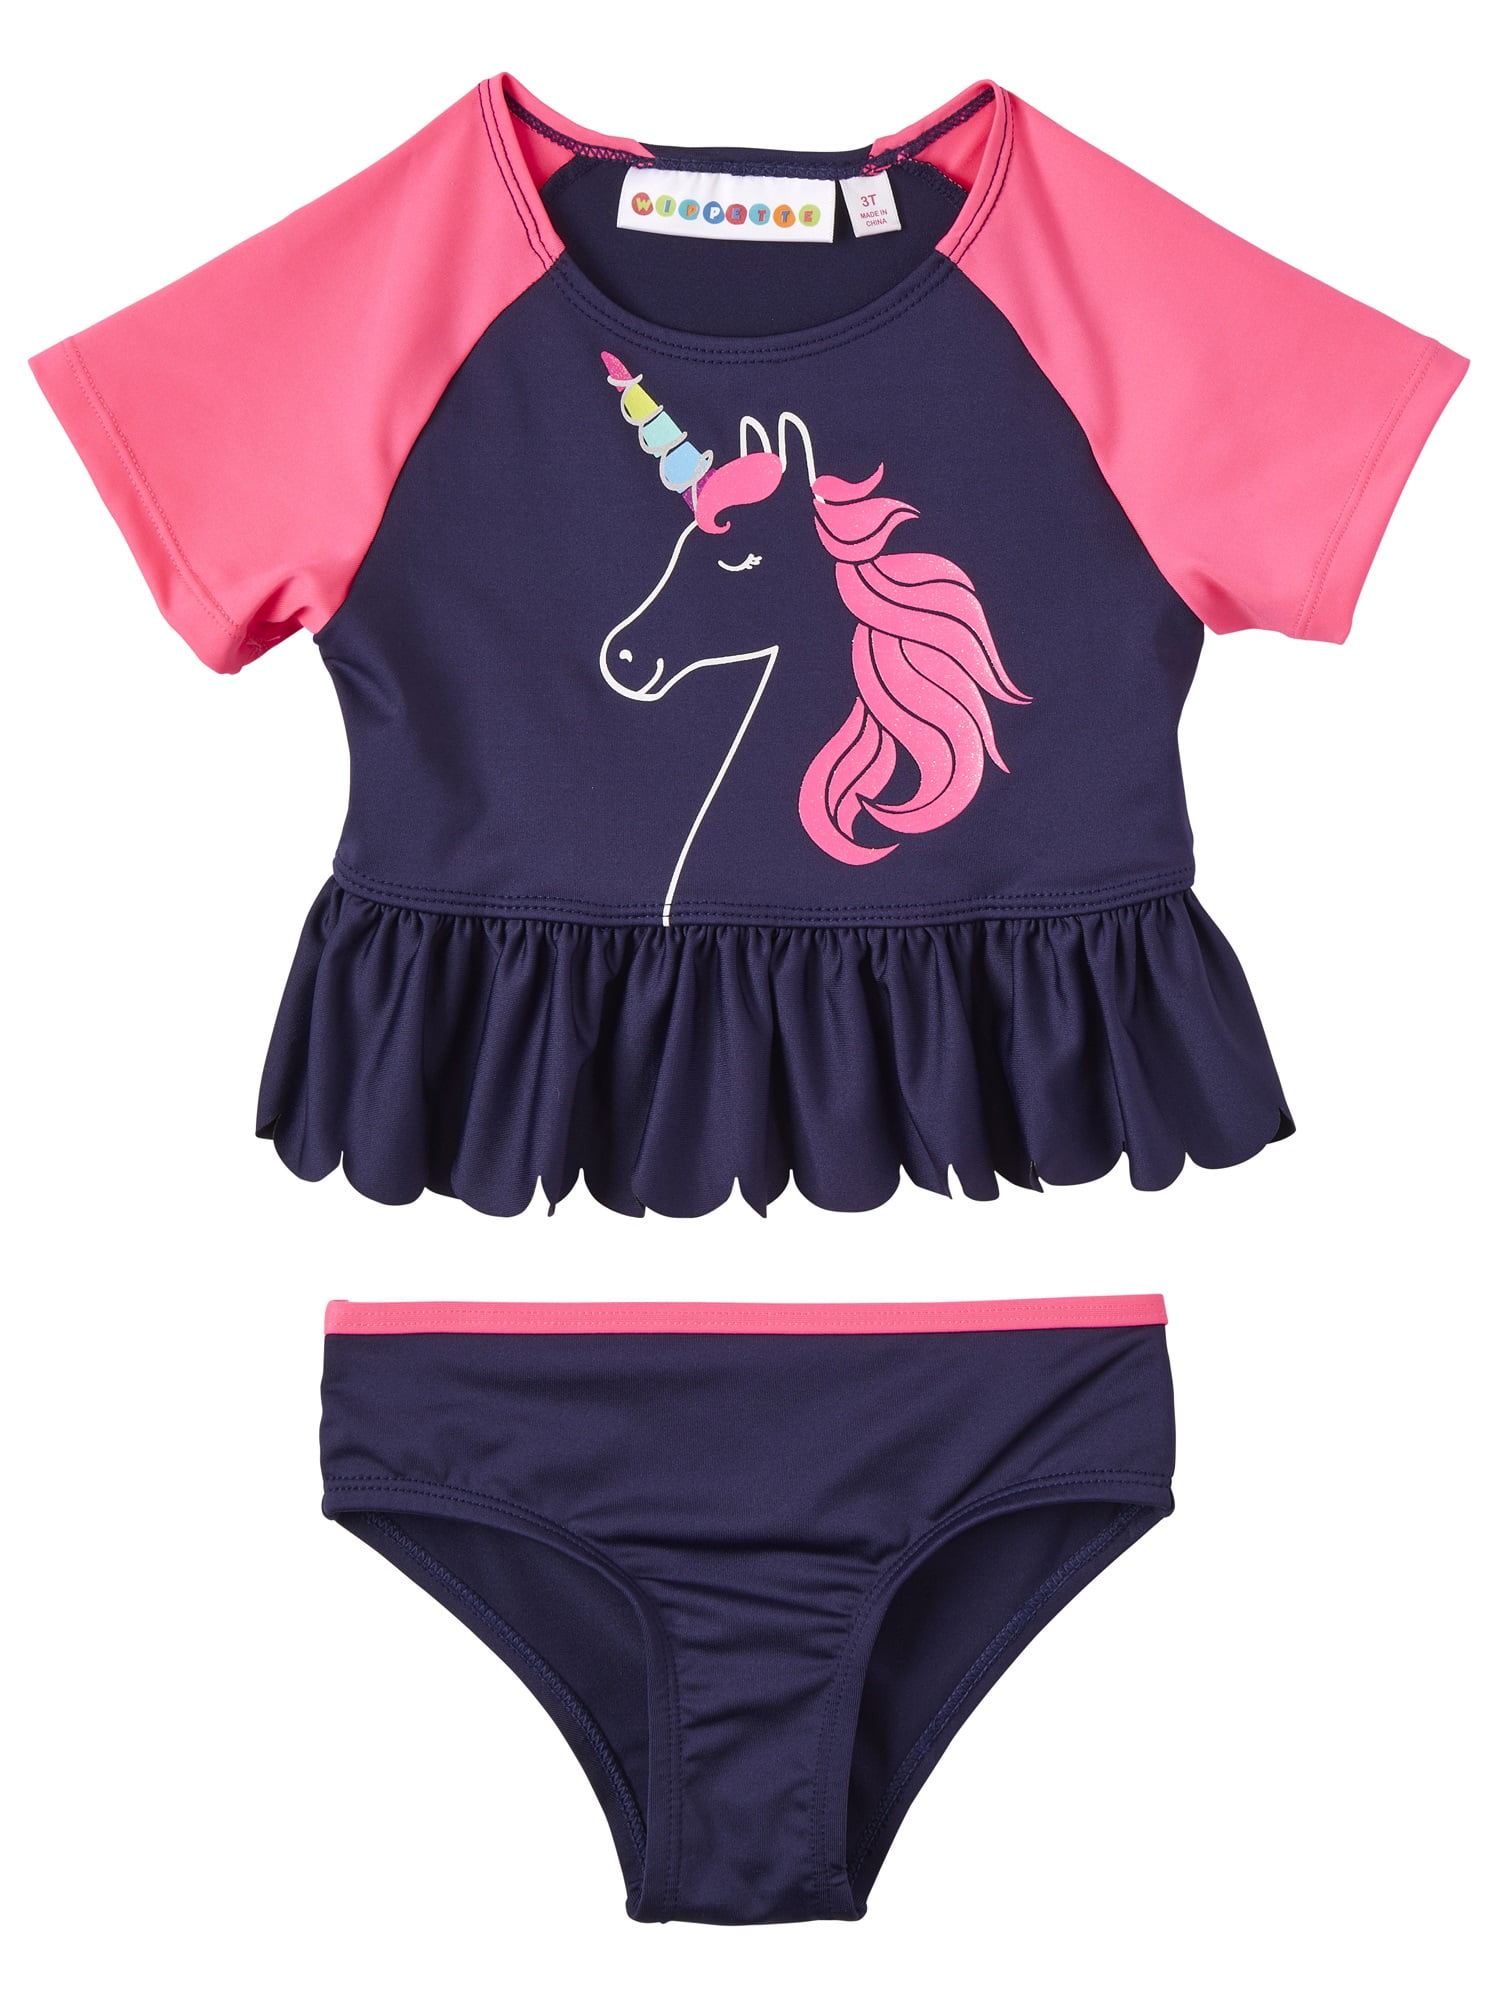 Wippette Baby Girls 2-Piece Rash Guard and Bikini Toddler Swuimsuit Set Size Toddler 3T Tomato Whale 